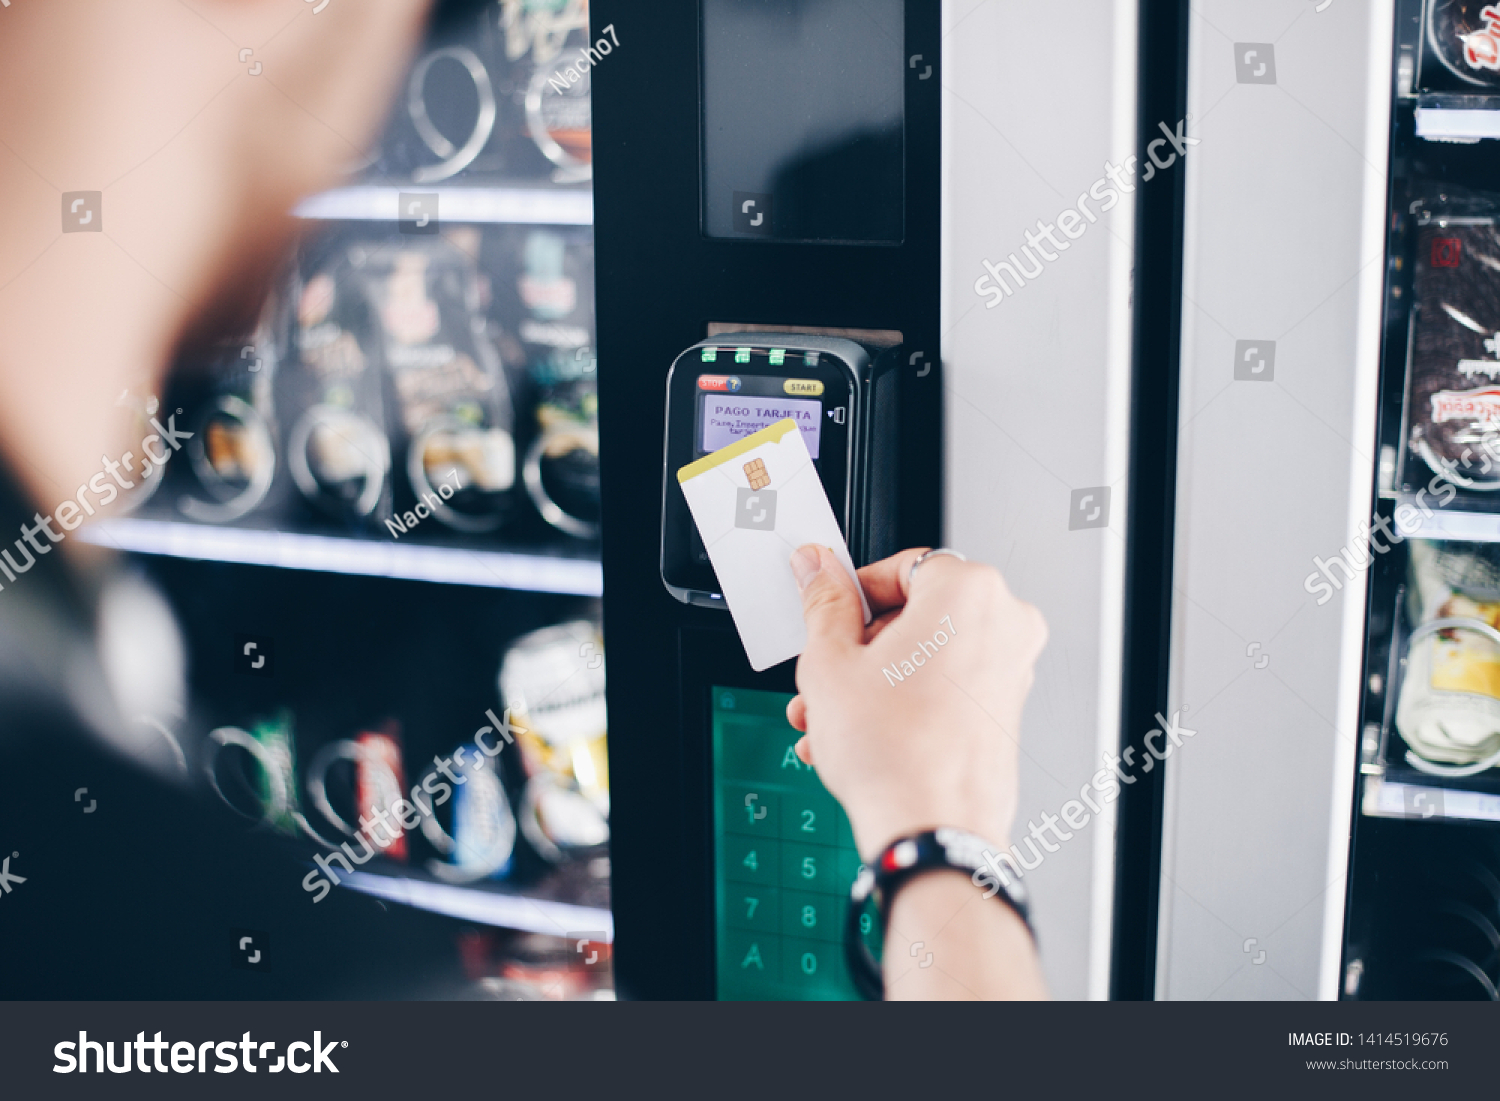 Student using the contactless payment method in a vending machine. #1414519676